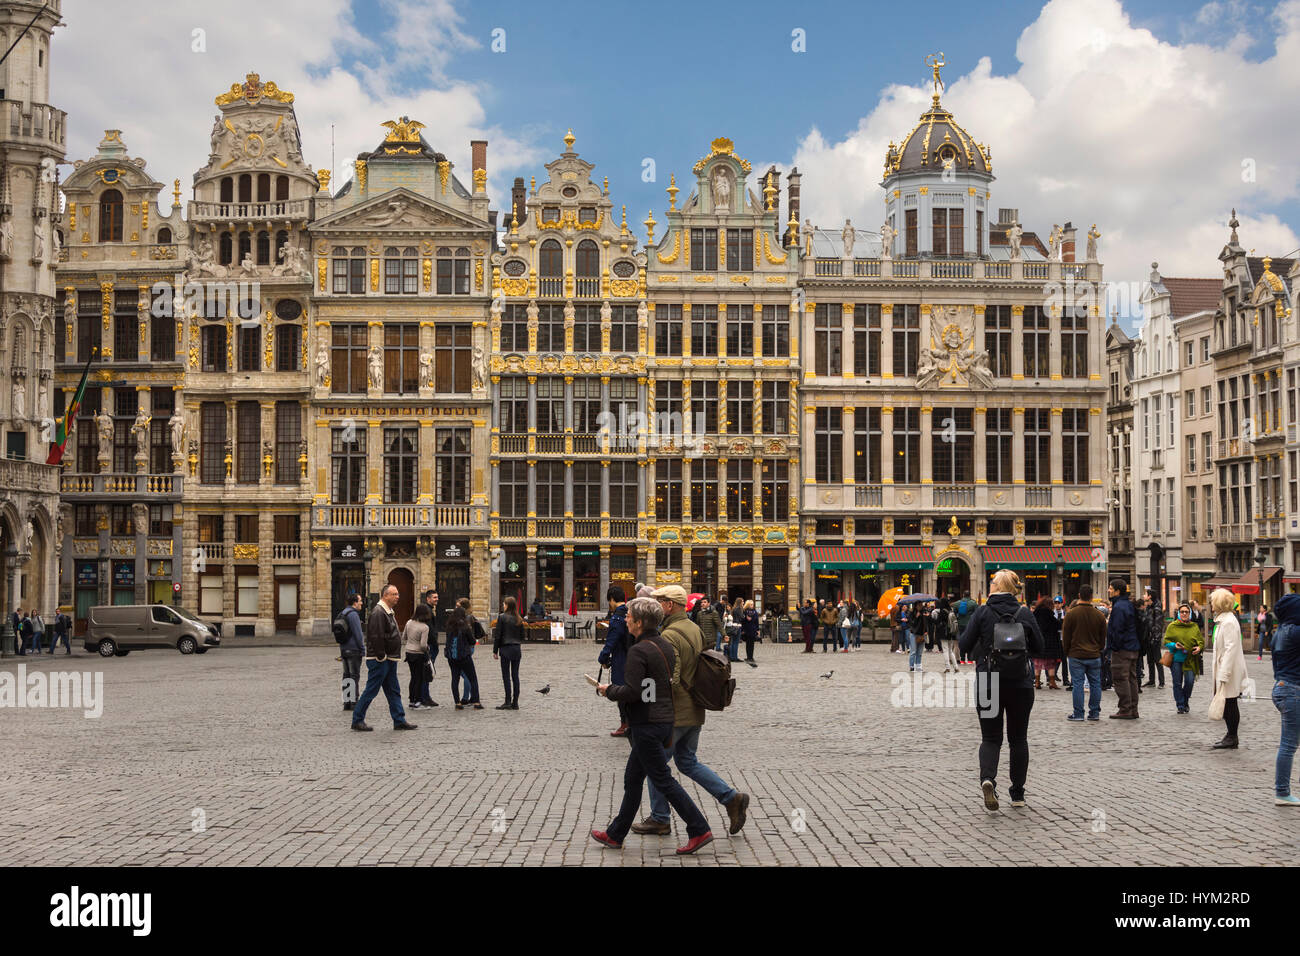 A view of Grand Place in Brussels Stock Photo